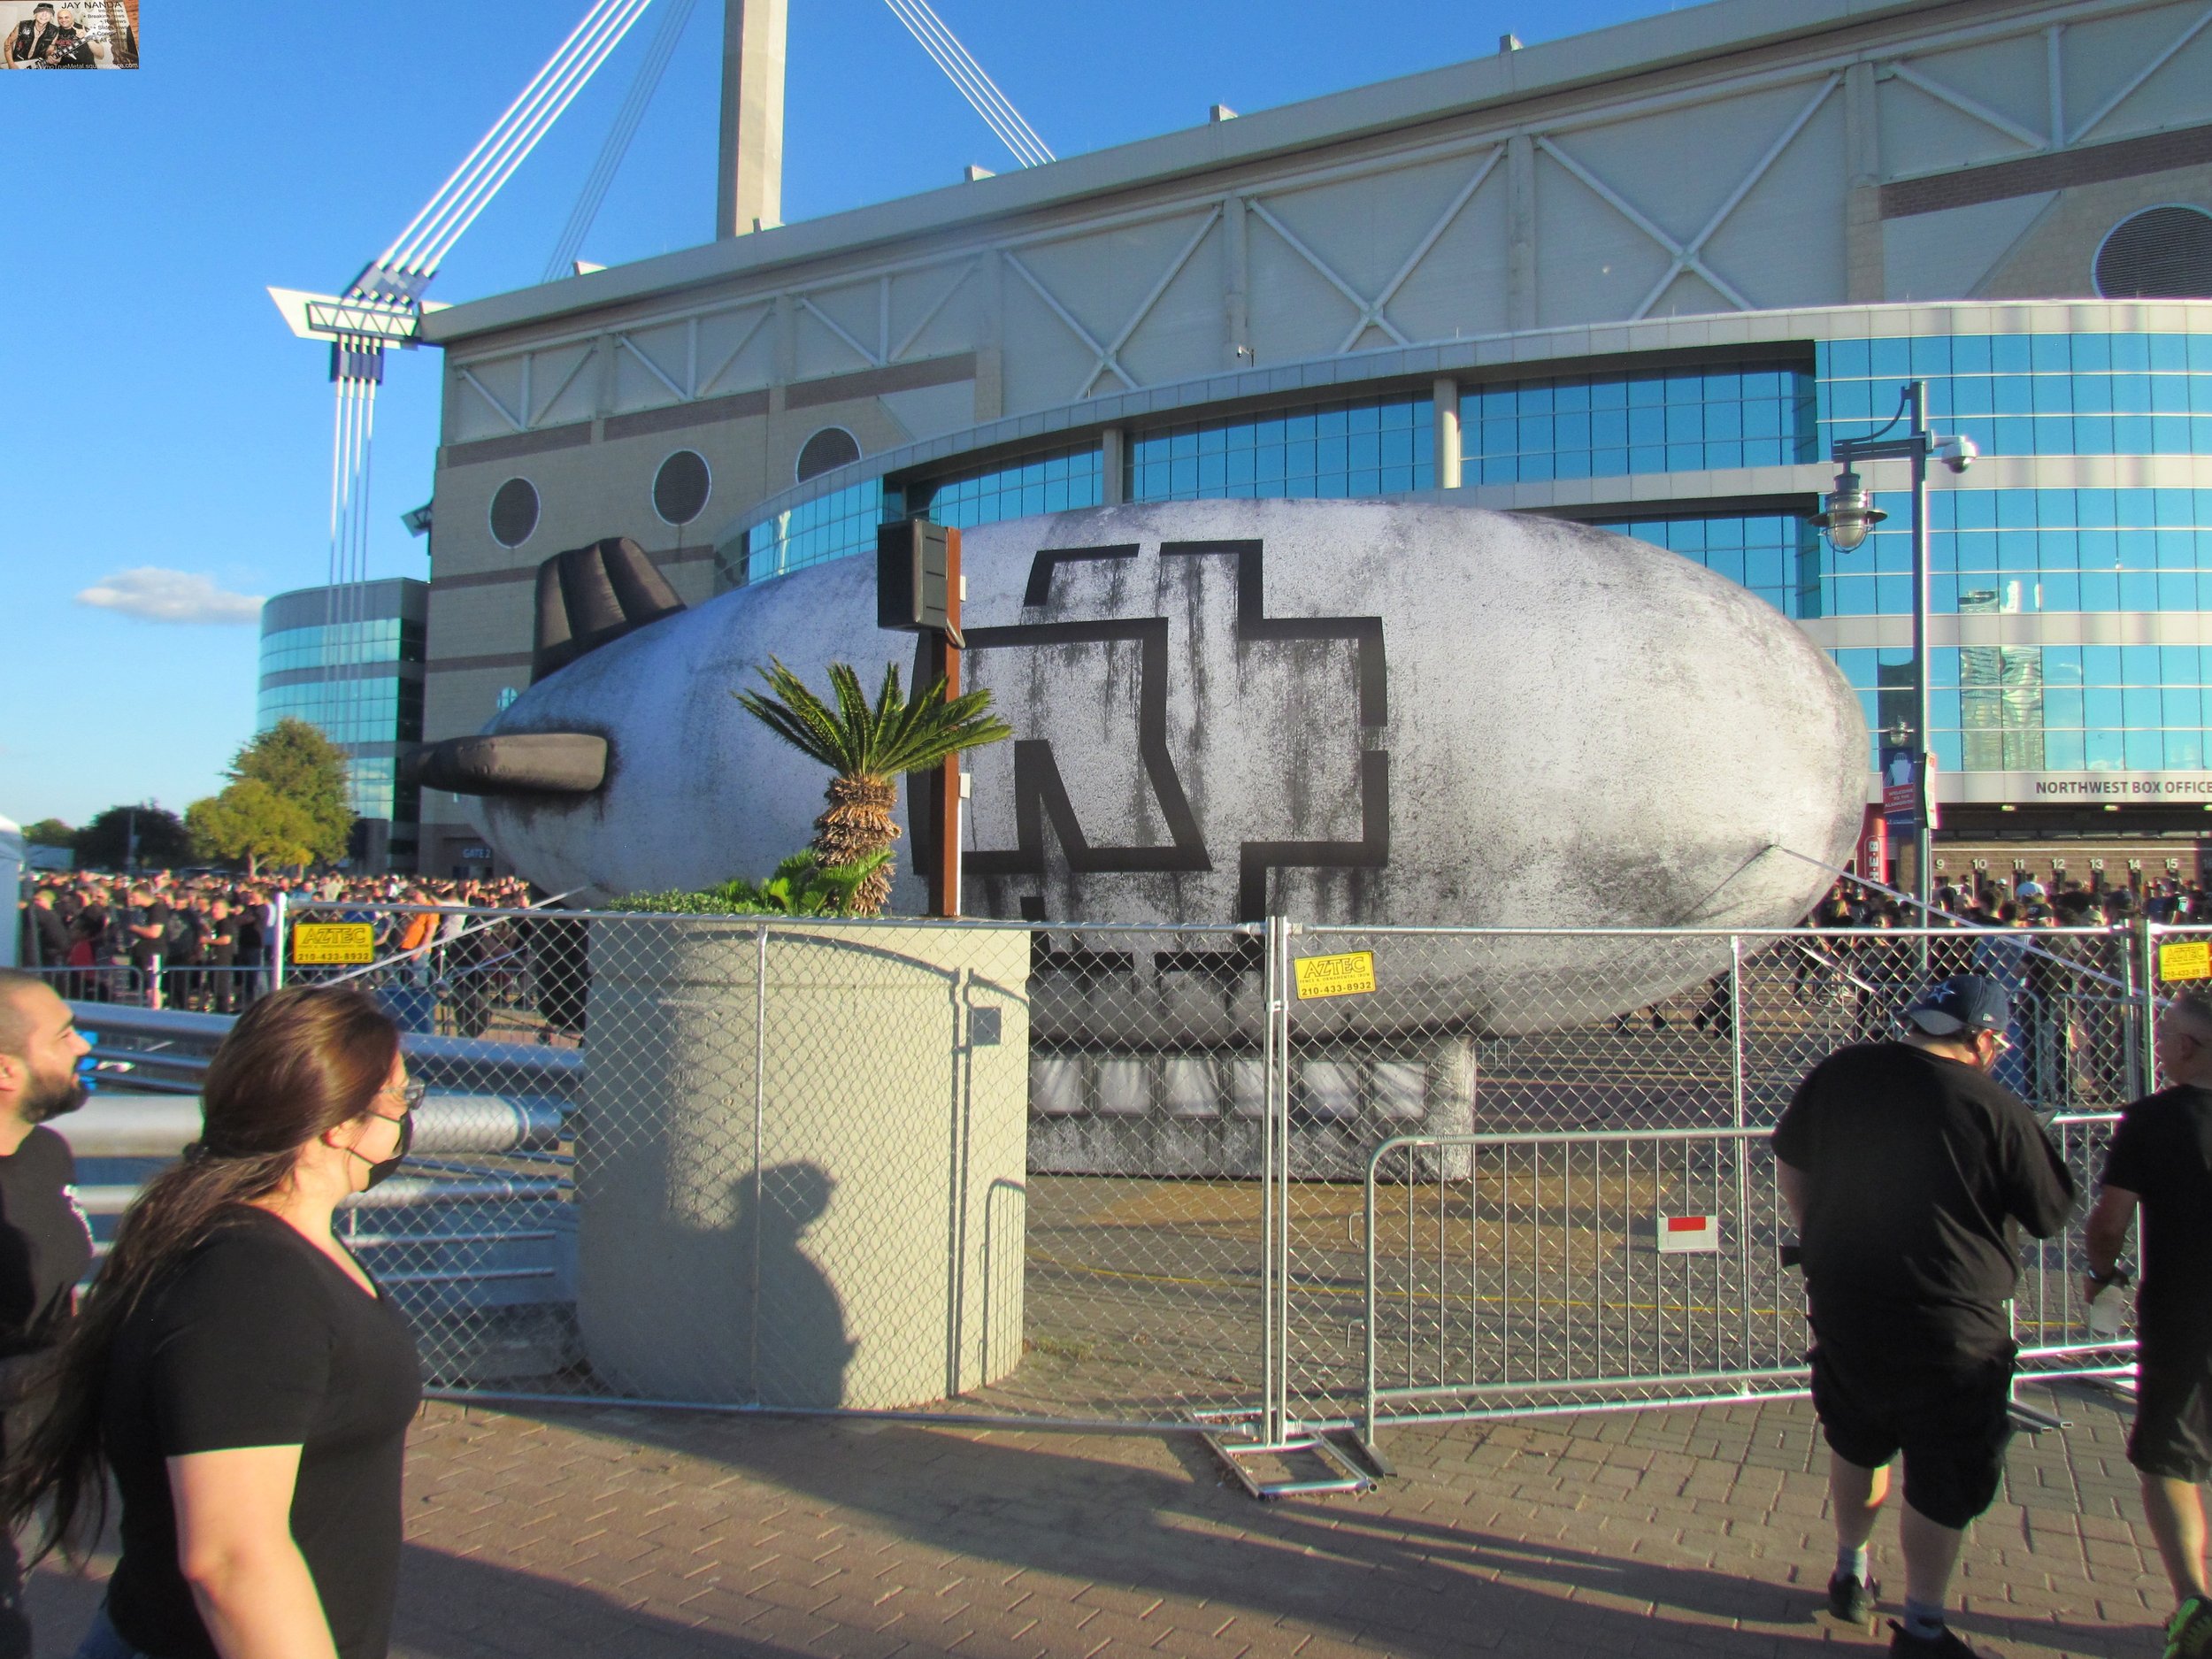  Some of the approximately 40,000 fans find a symbol of Rammstein’s latest album  Zeit  outside the dome upon their entrance.  